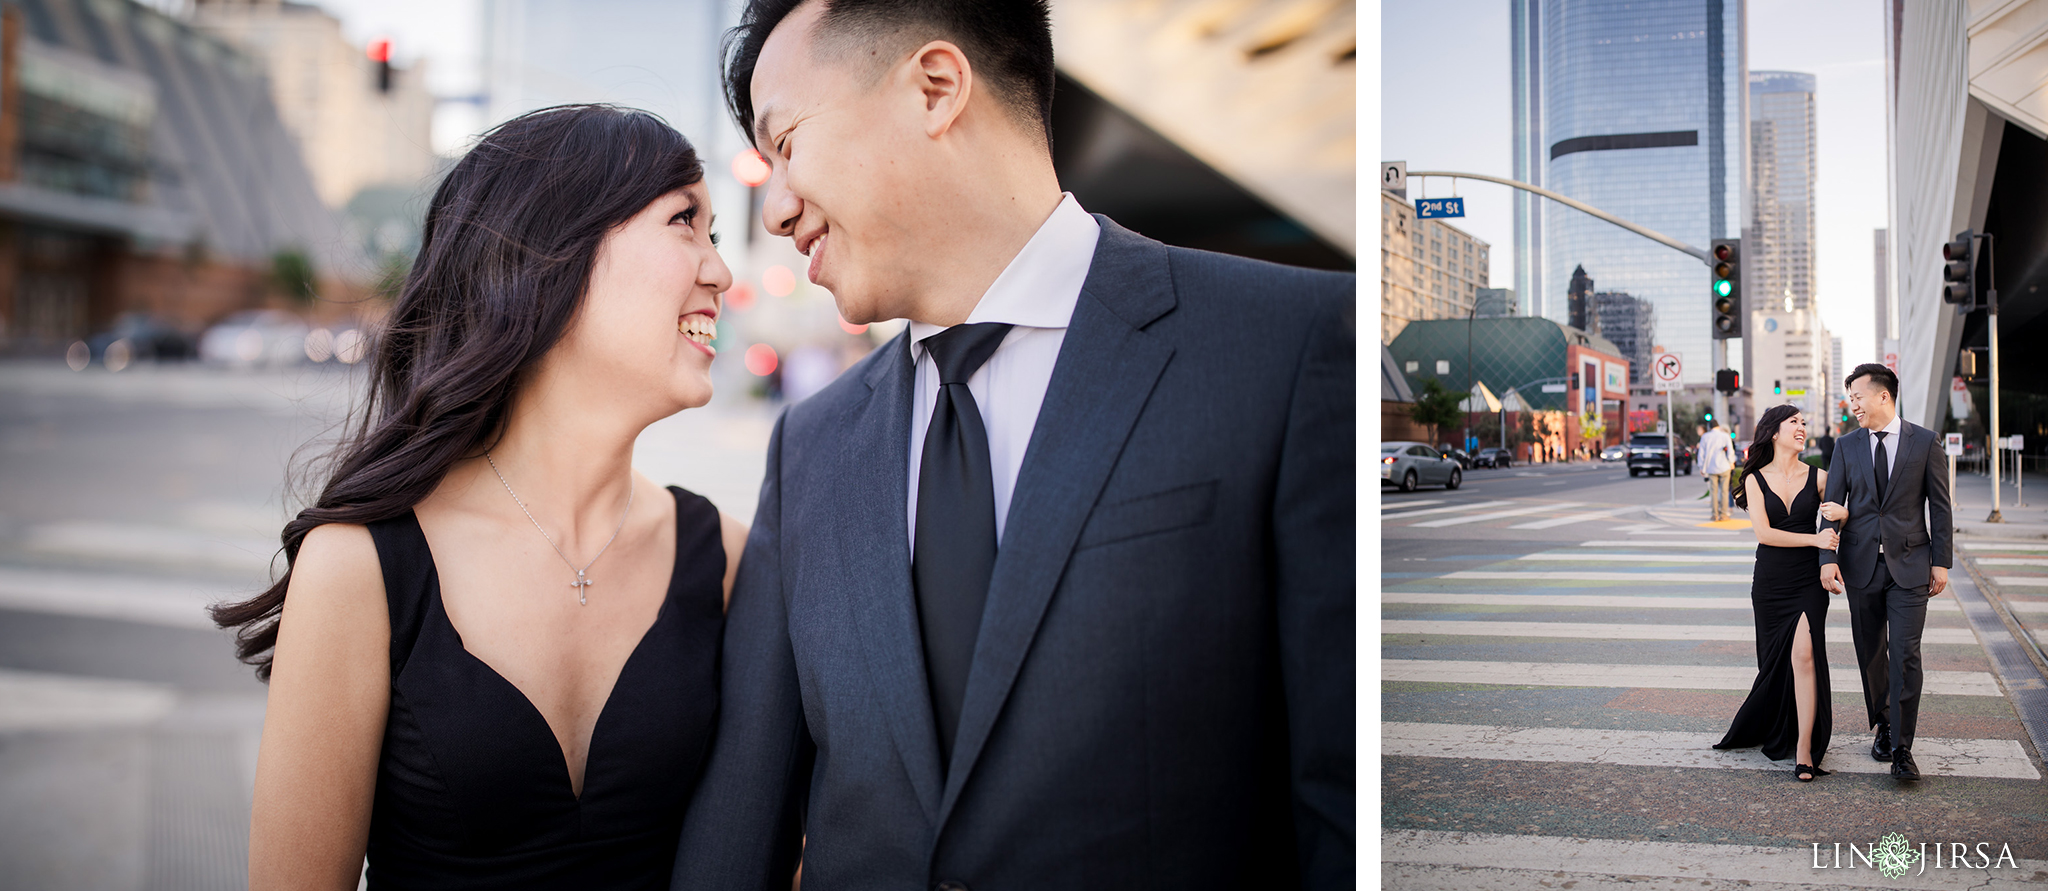 14 Downtown Los Angeles Engagement Photography